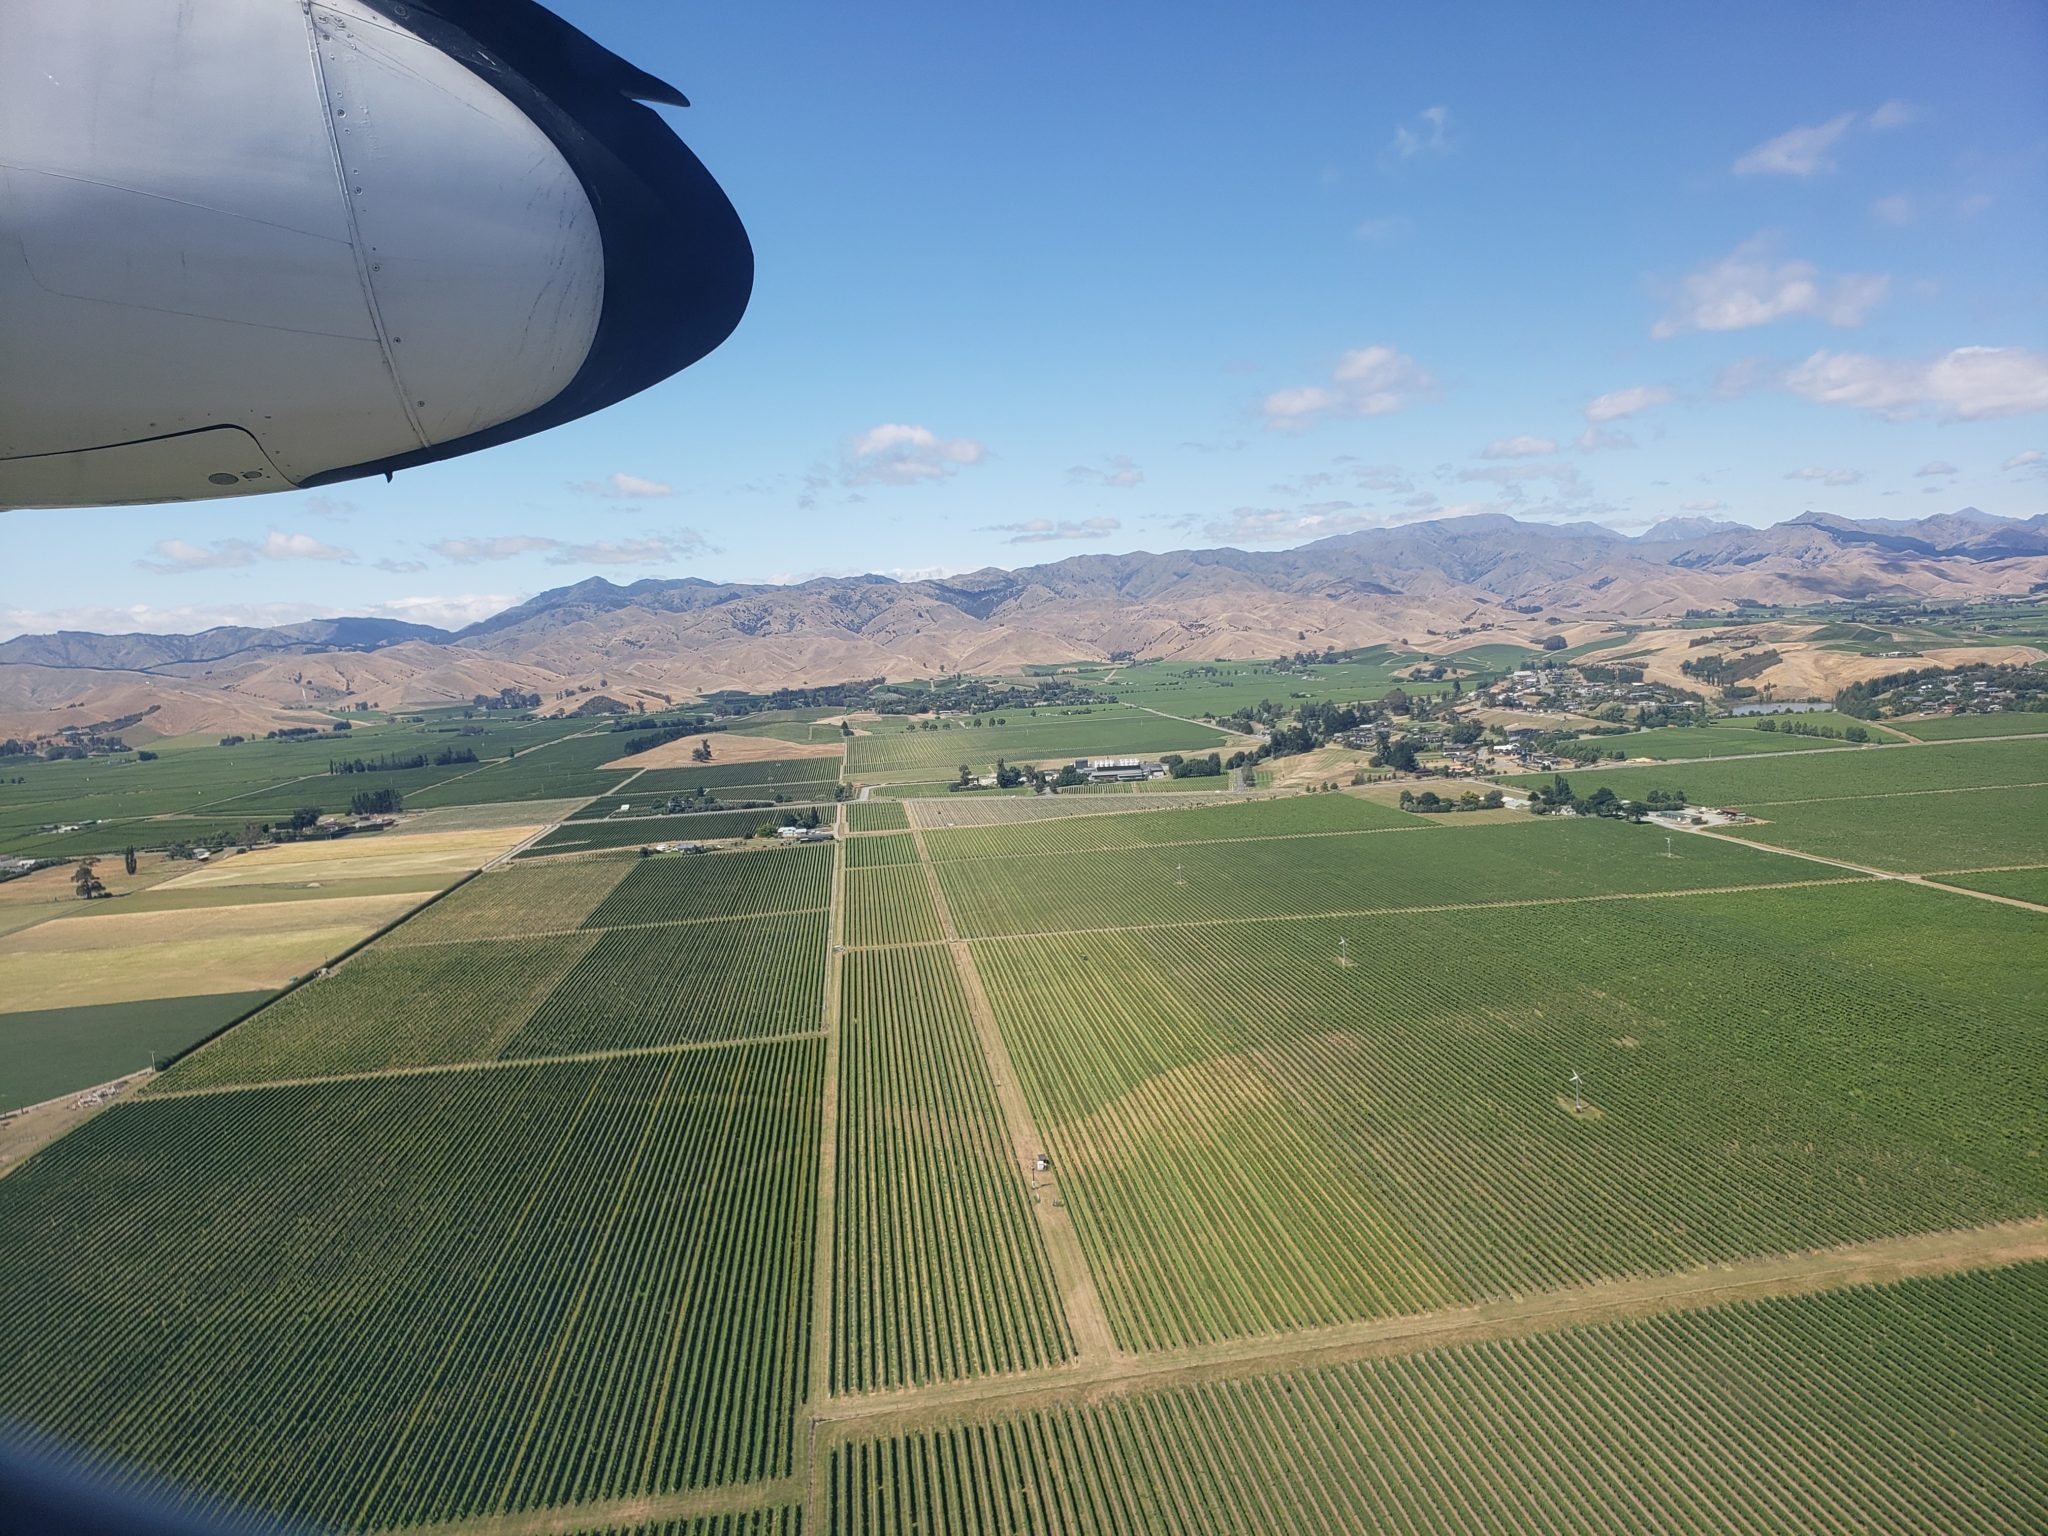 a view of a field of green plants and mountains from an airplane